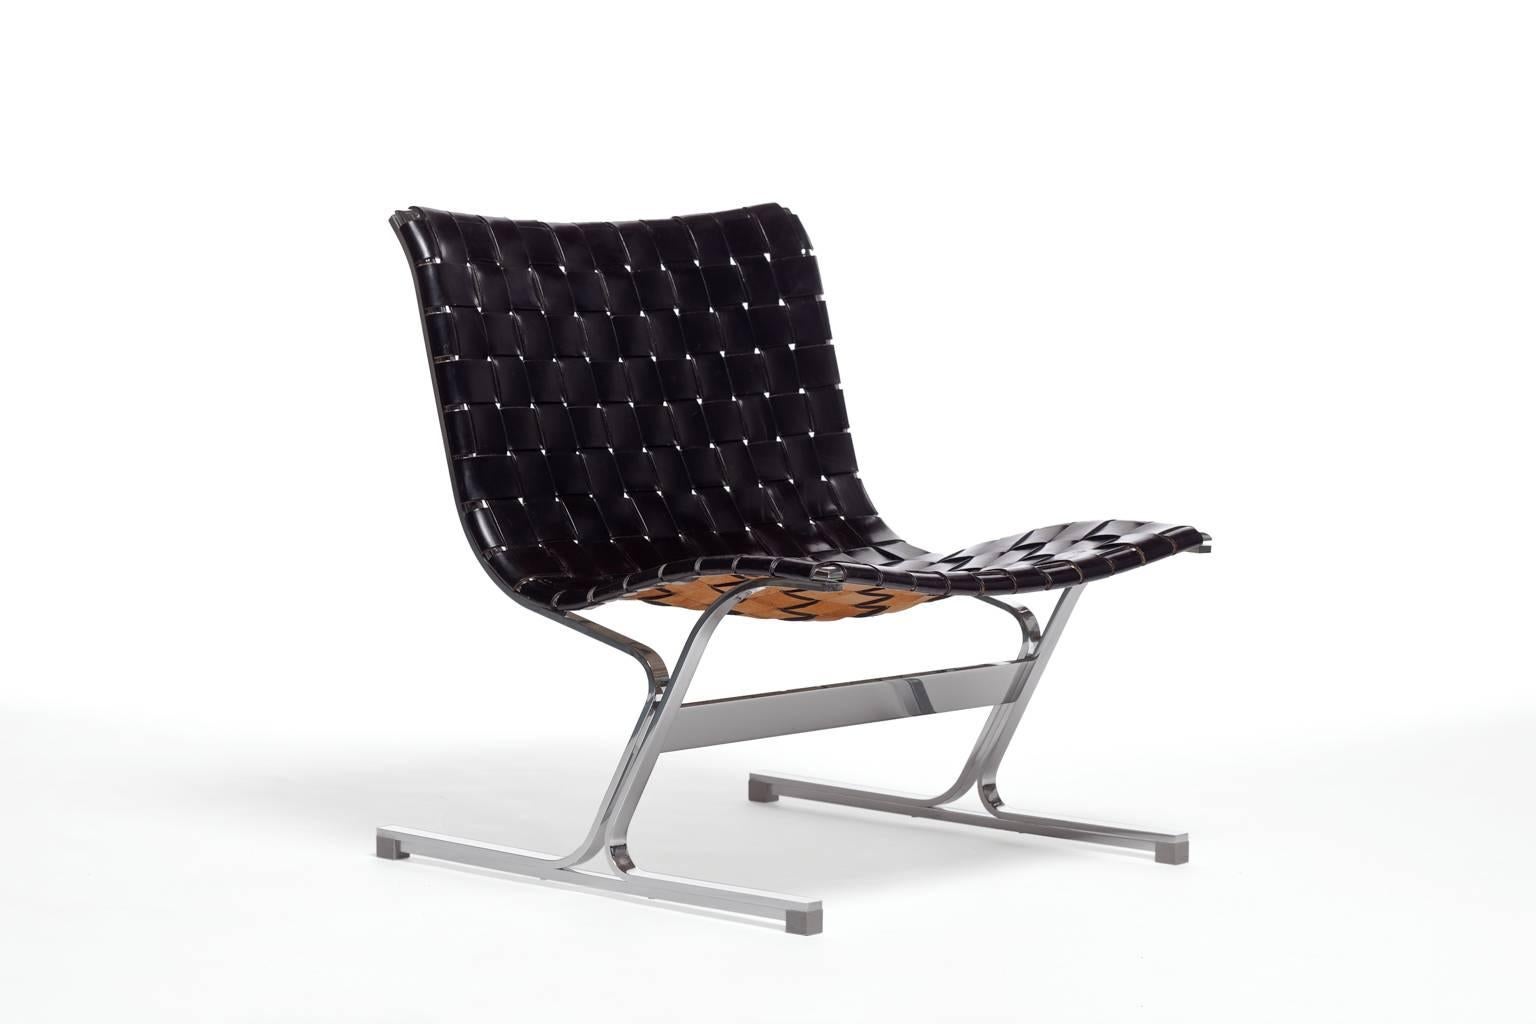 Beautiful Black Leather Lounge Chair model PLR 1 by Ross Littell for ICF Italy, 1967. High quality chromed steel and the original thick woven leather strings with a great Patina. Excellent original condition.
